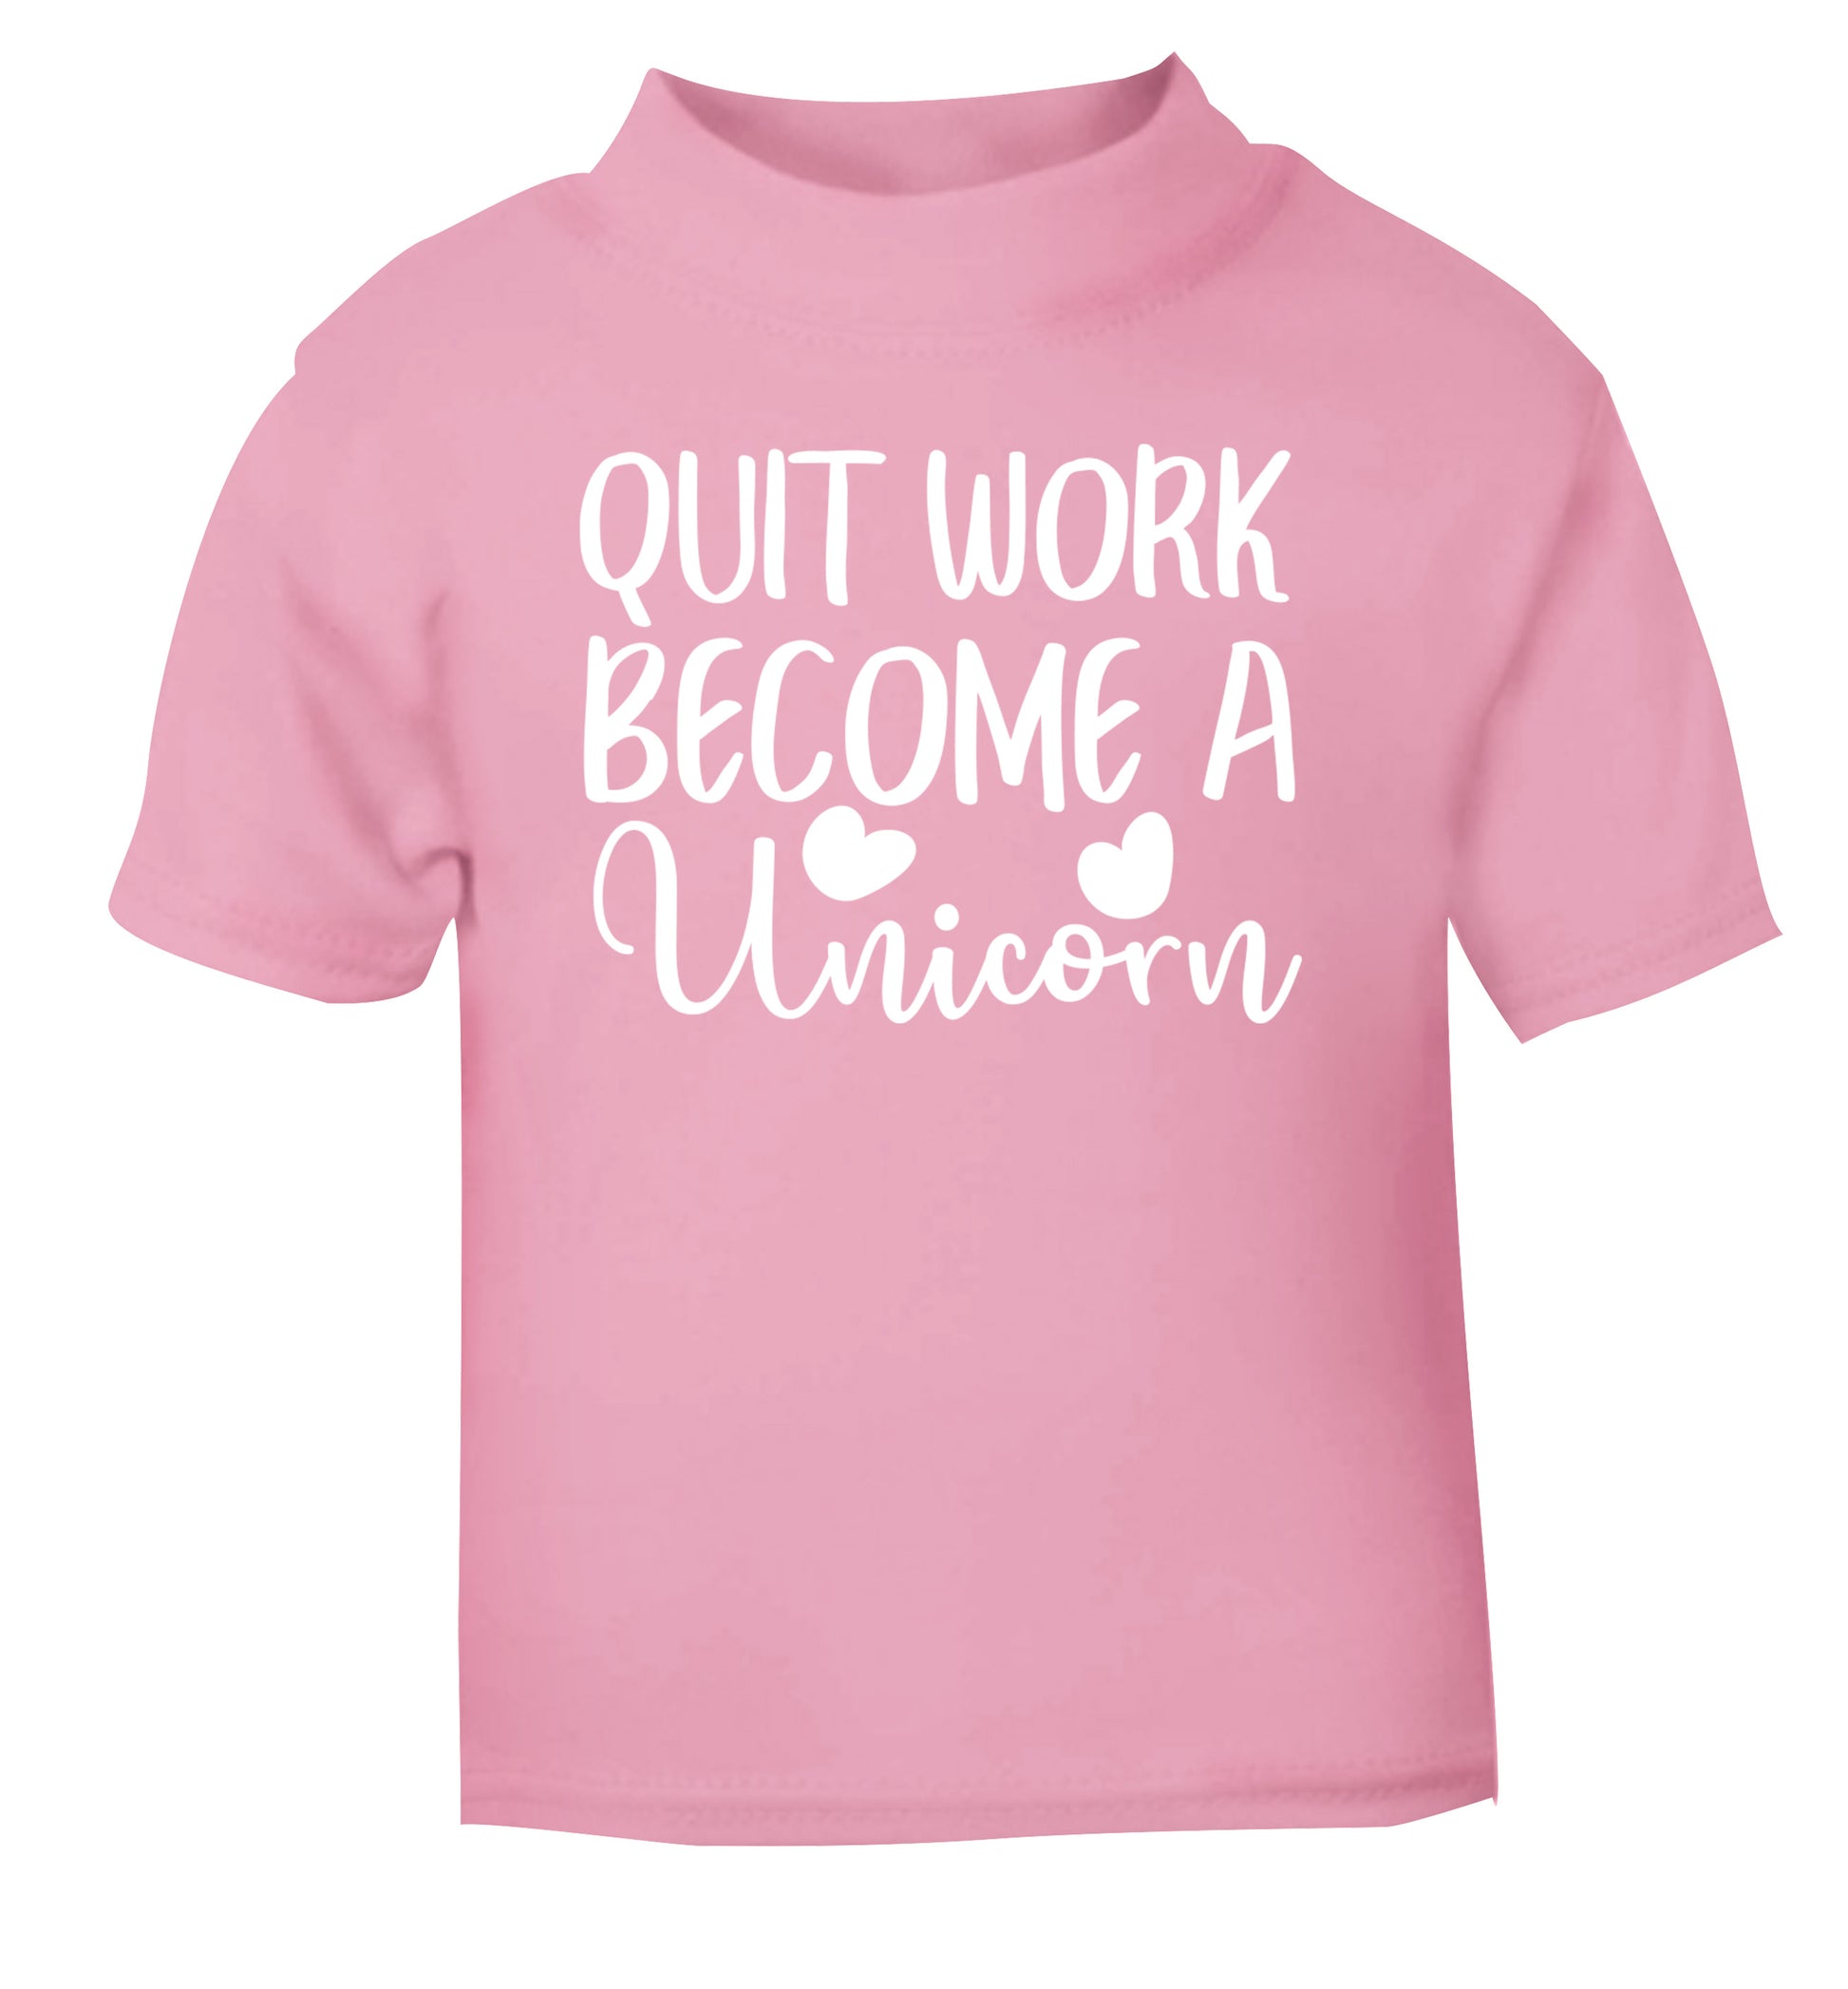 Quit work become a unicorn light pink Baby Toddler Tshirt 2 Years